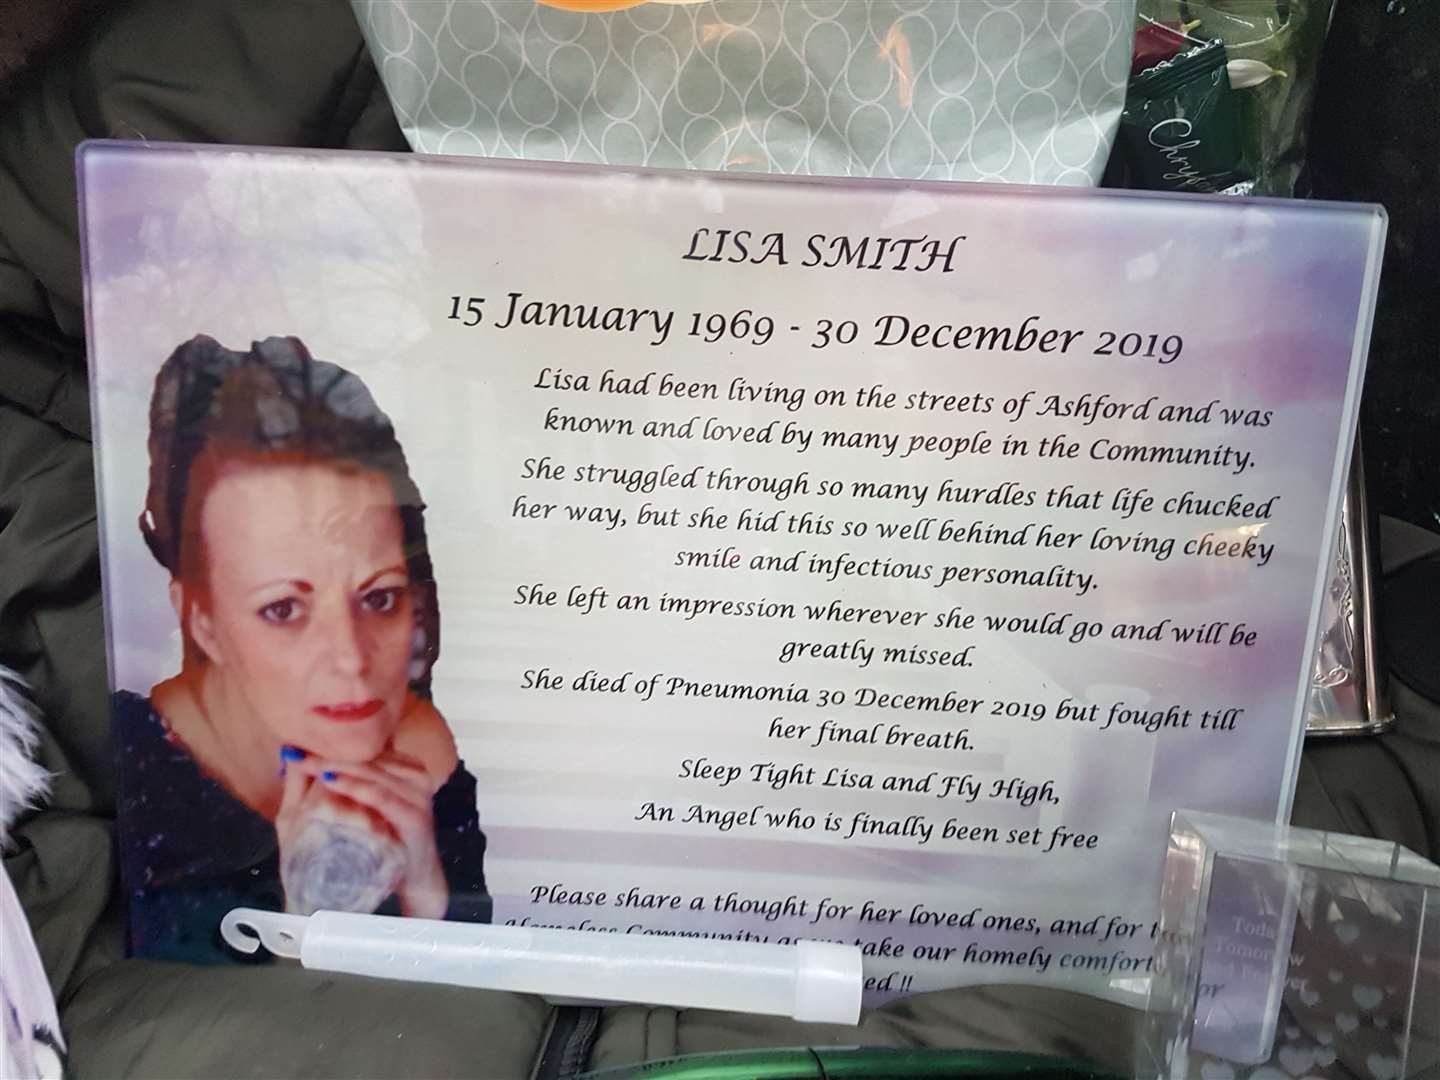 Heartfelt tributes have been made by those who knew her